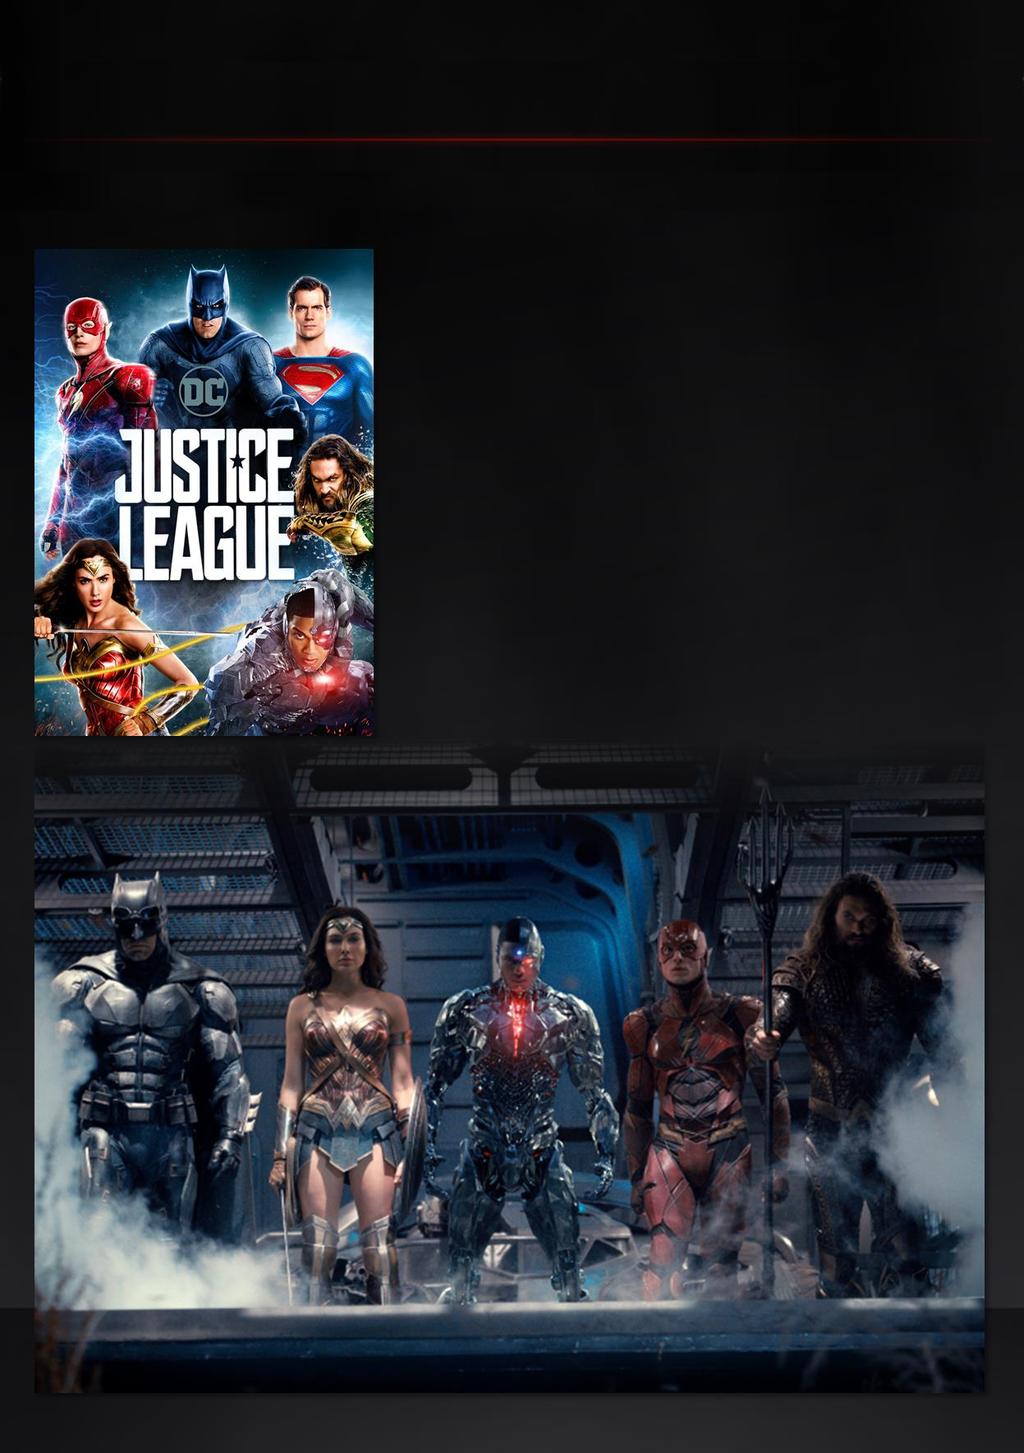 Justice League and all related characters and elements are trademarks of and DC Comics. 2018 Warner Bros. Entertainment Inc. and RatPac-Dune Entertainment LLC. Justice League Start: 29.03.